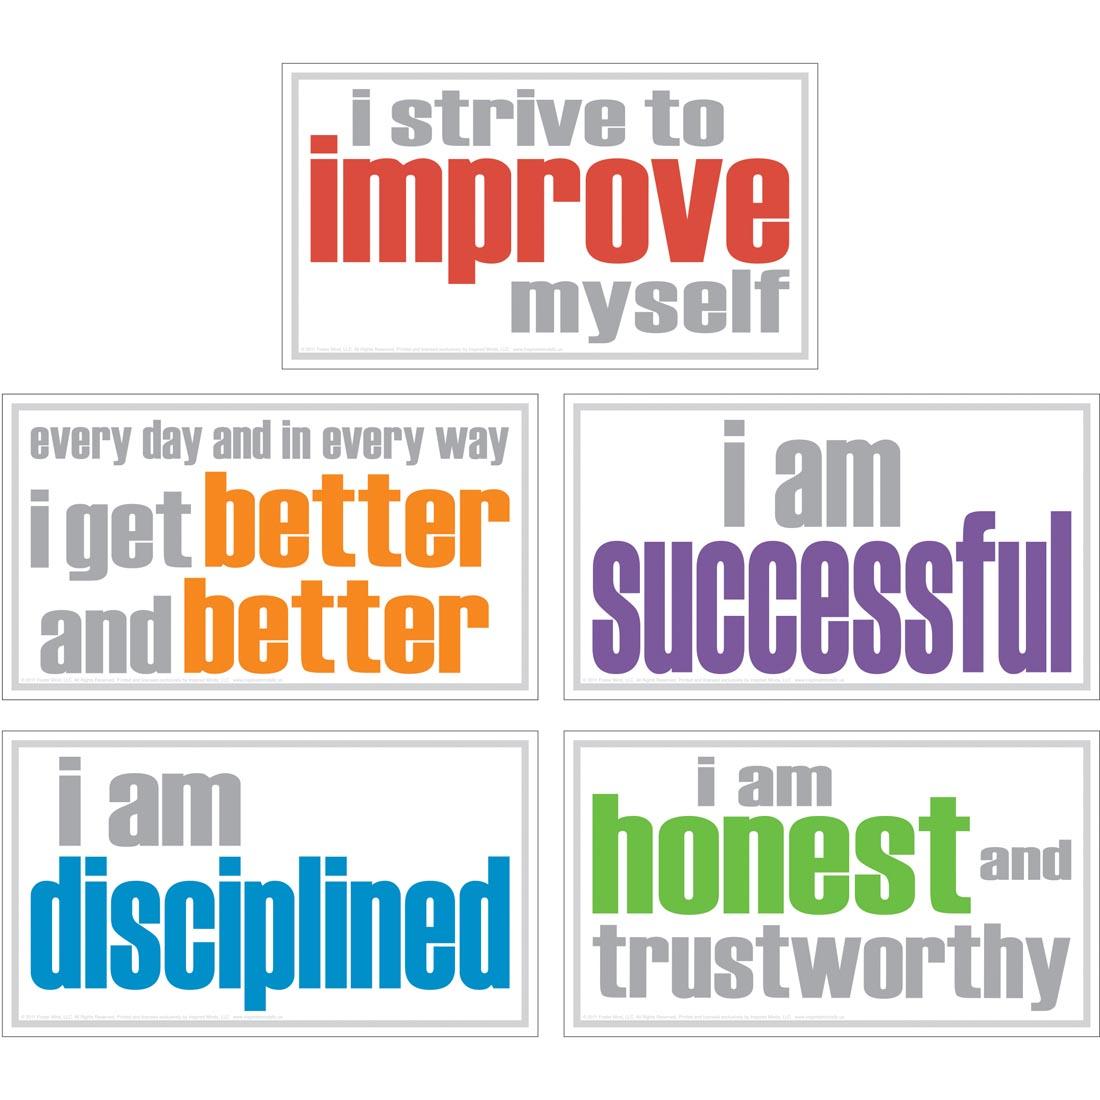 Inspired Minds Poster Set includes the messaged I strive to improve myself, every day and in every way I get better and better, I am successful, I am disciplined, I am honest and trustworthy